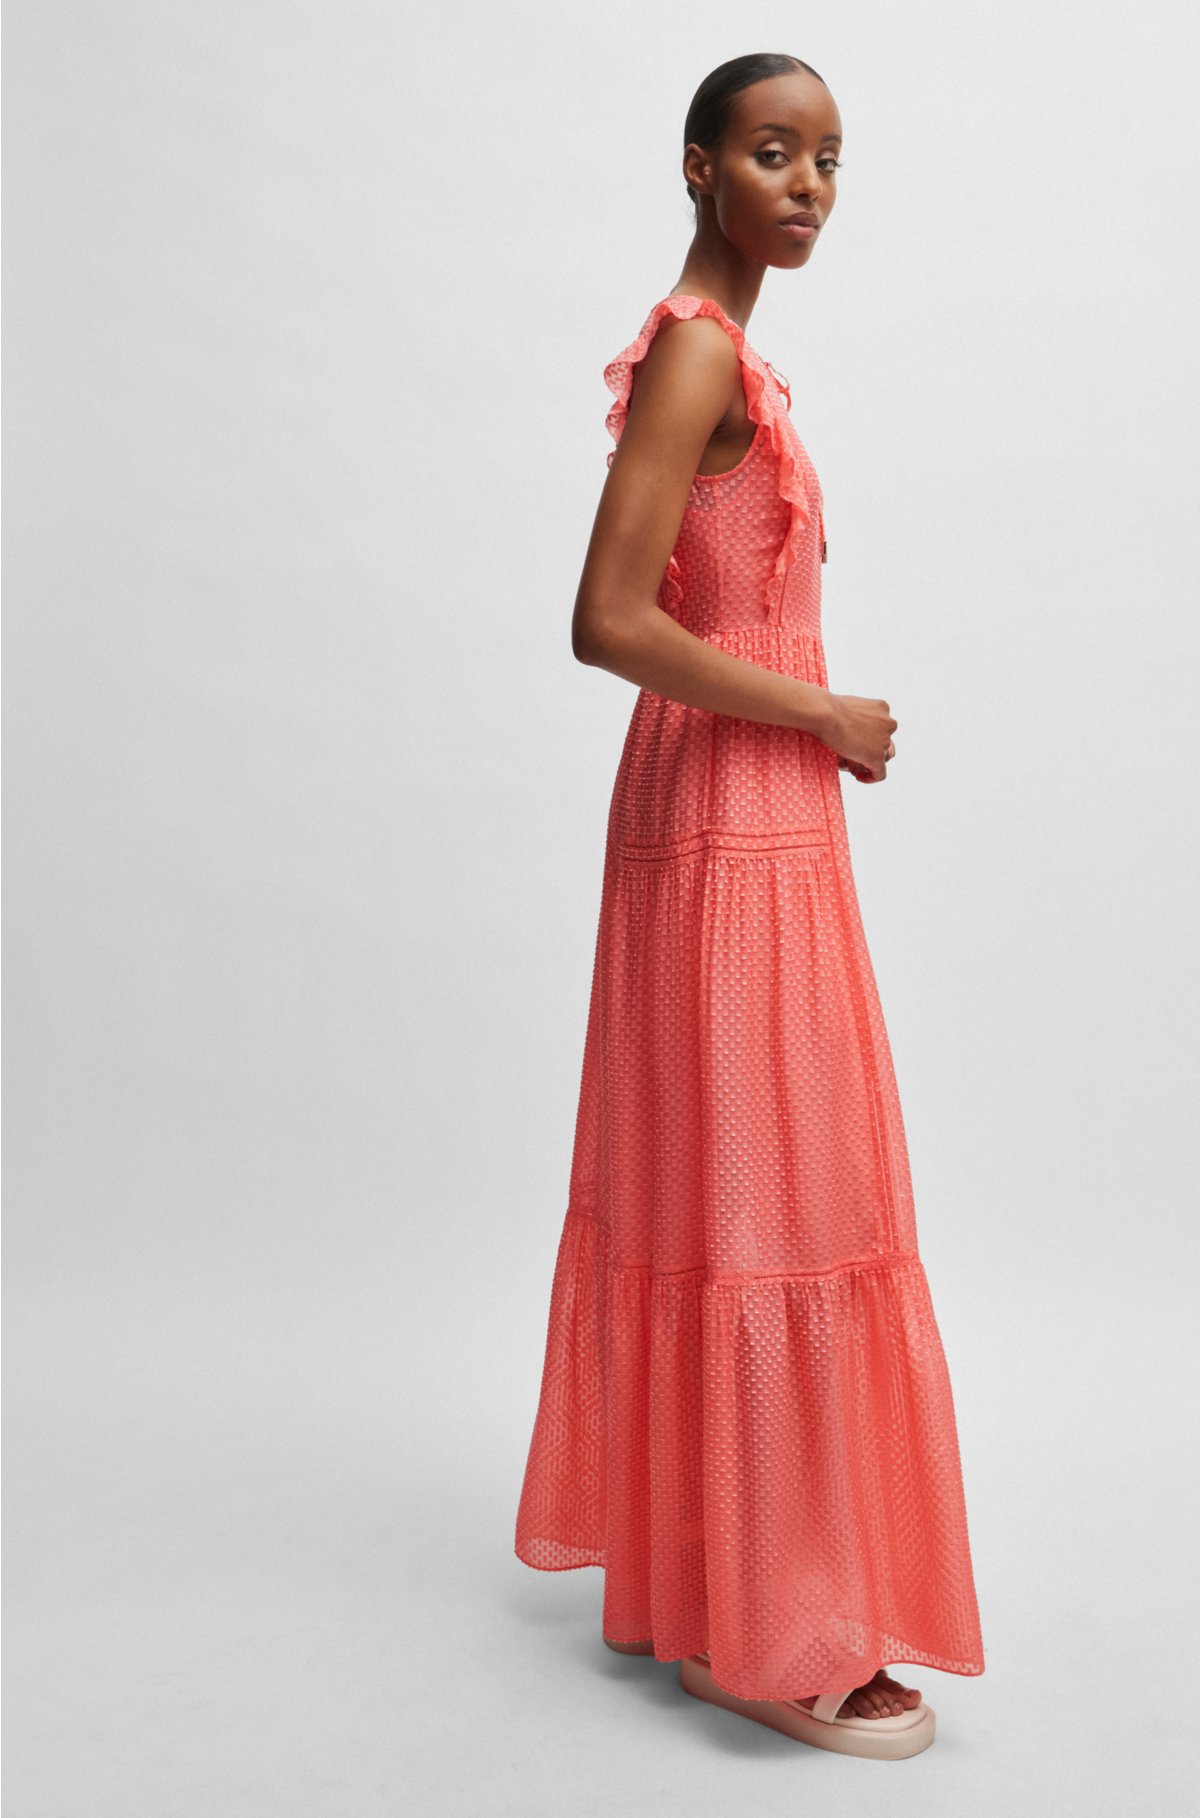 Tie-neckline sleeveless dress with frill trims, Coral